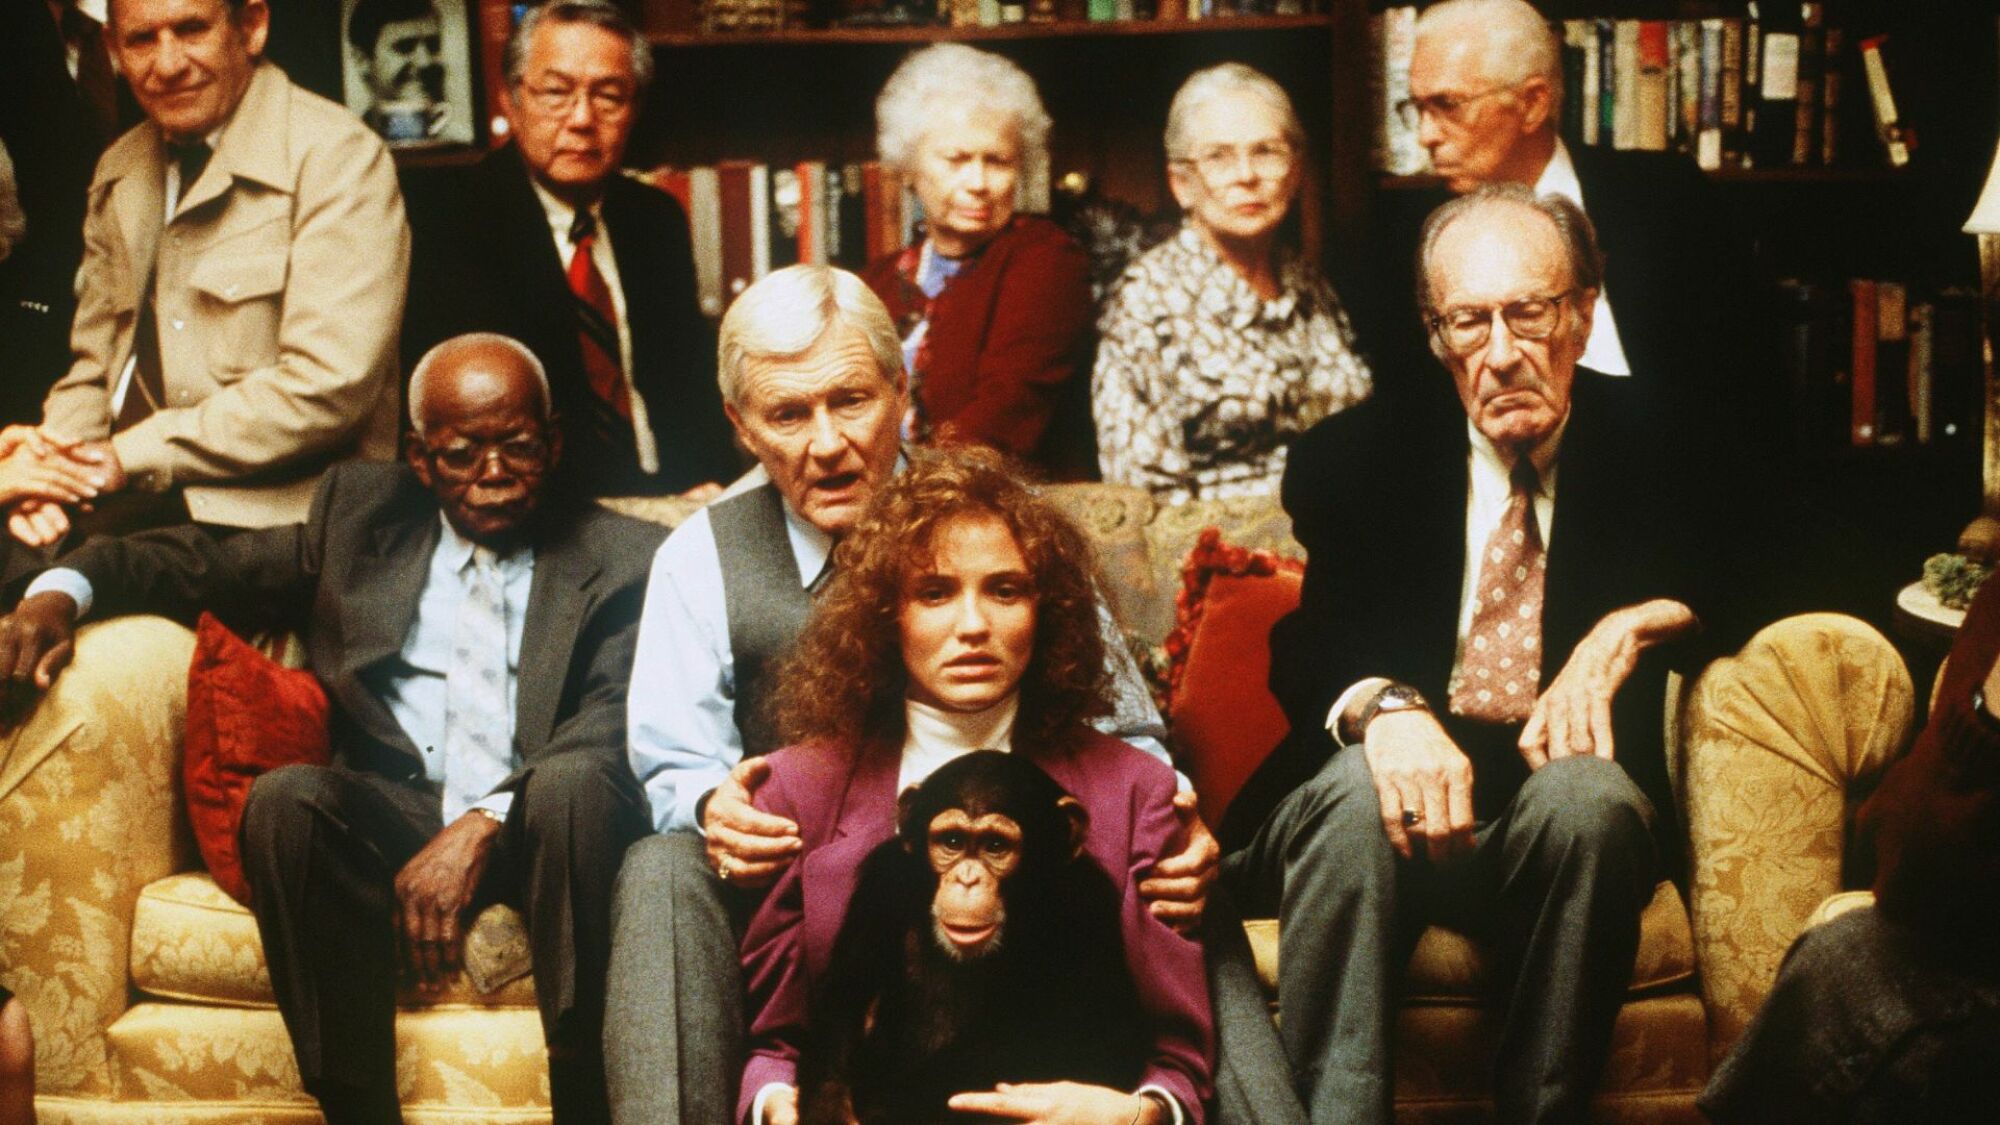 Cameron Diaz is surrounded by quirky characters, and a chimpanzee, in "Being John Malkovich."